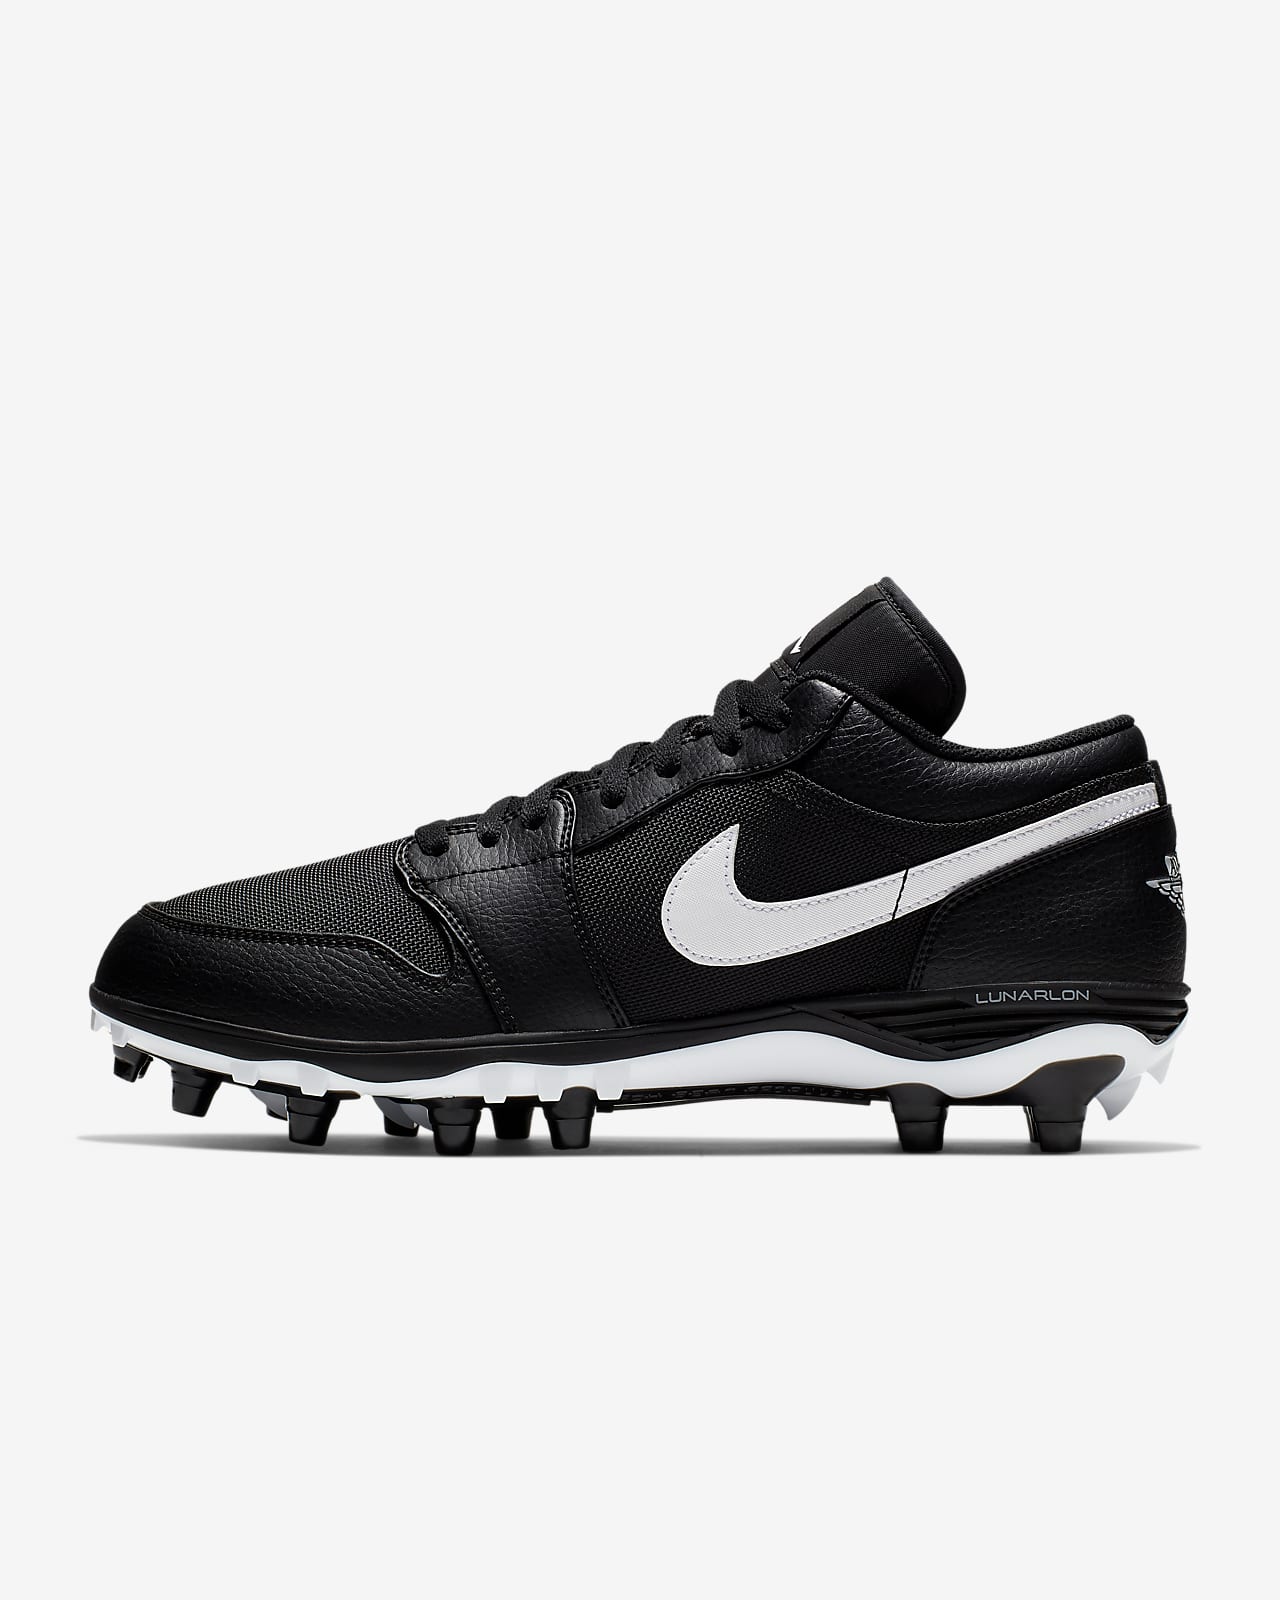 mens low football cleats